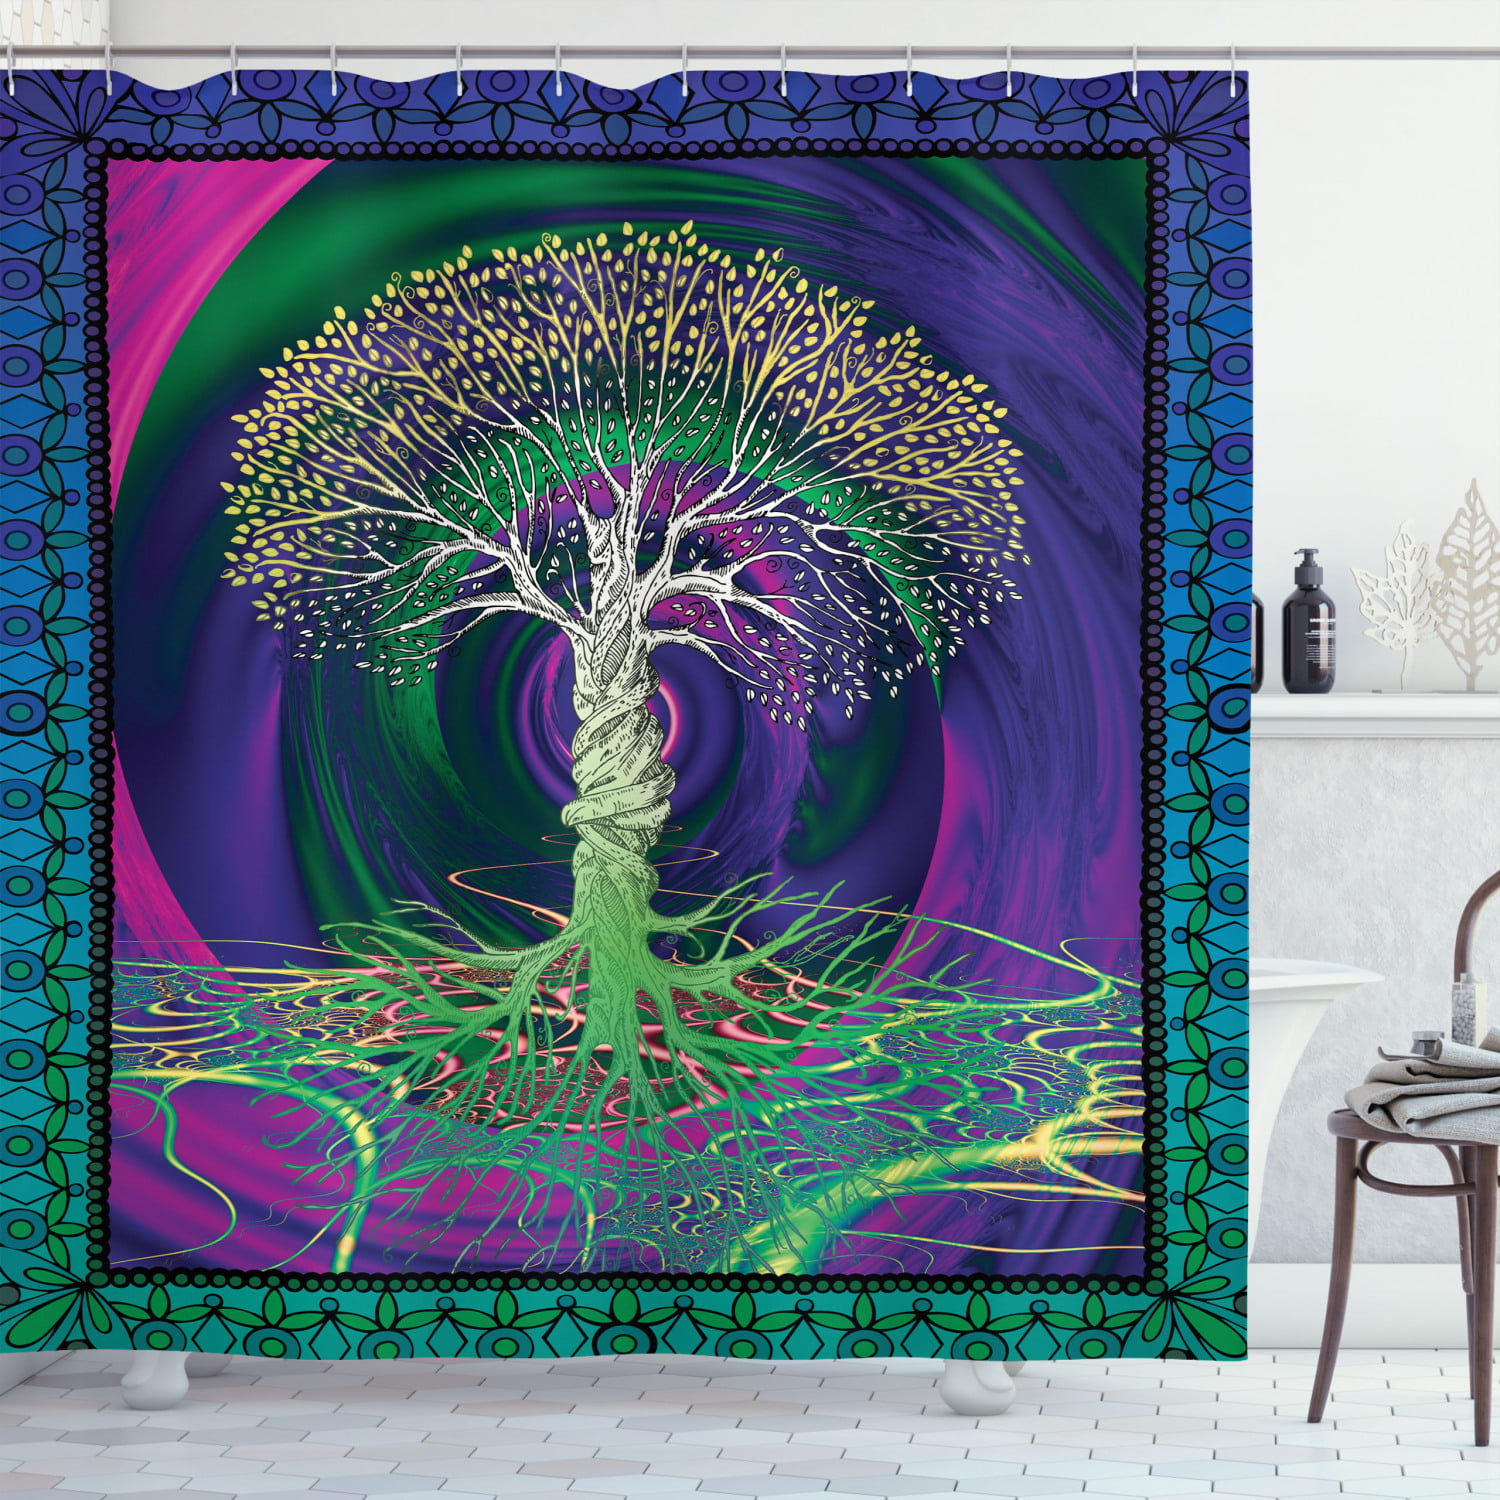 Psychedelic Forest Vortex Shower Curtain Bathroom Decor Fabric 71 In 